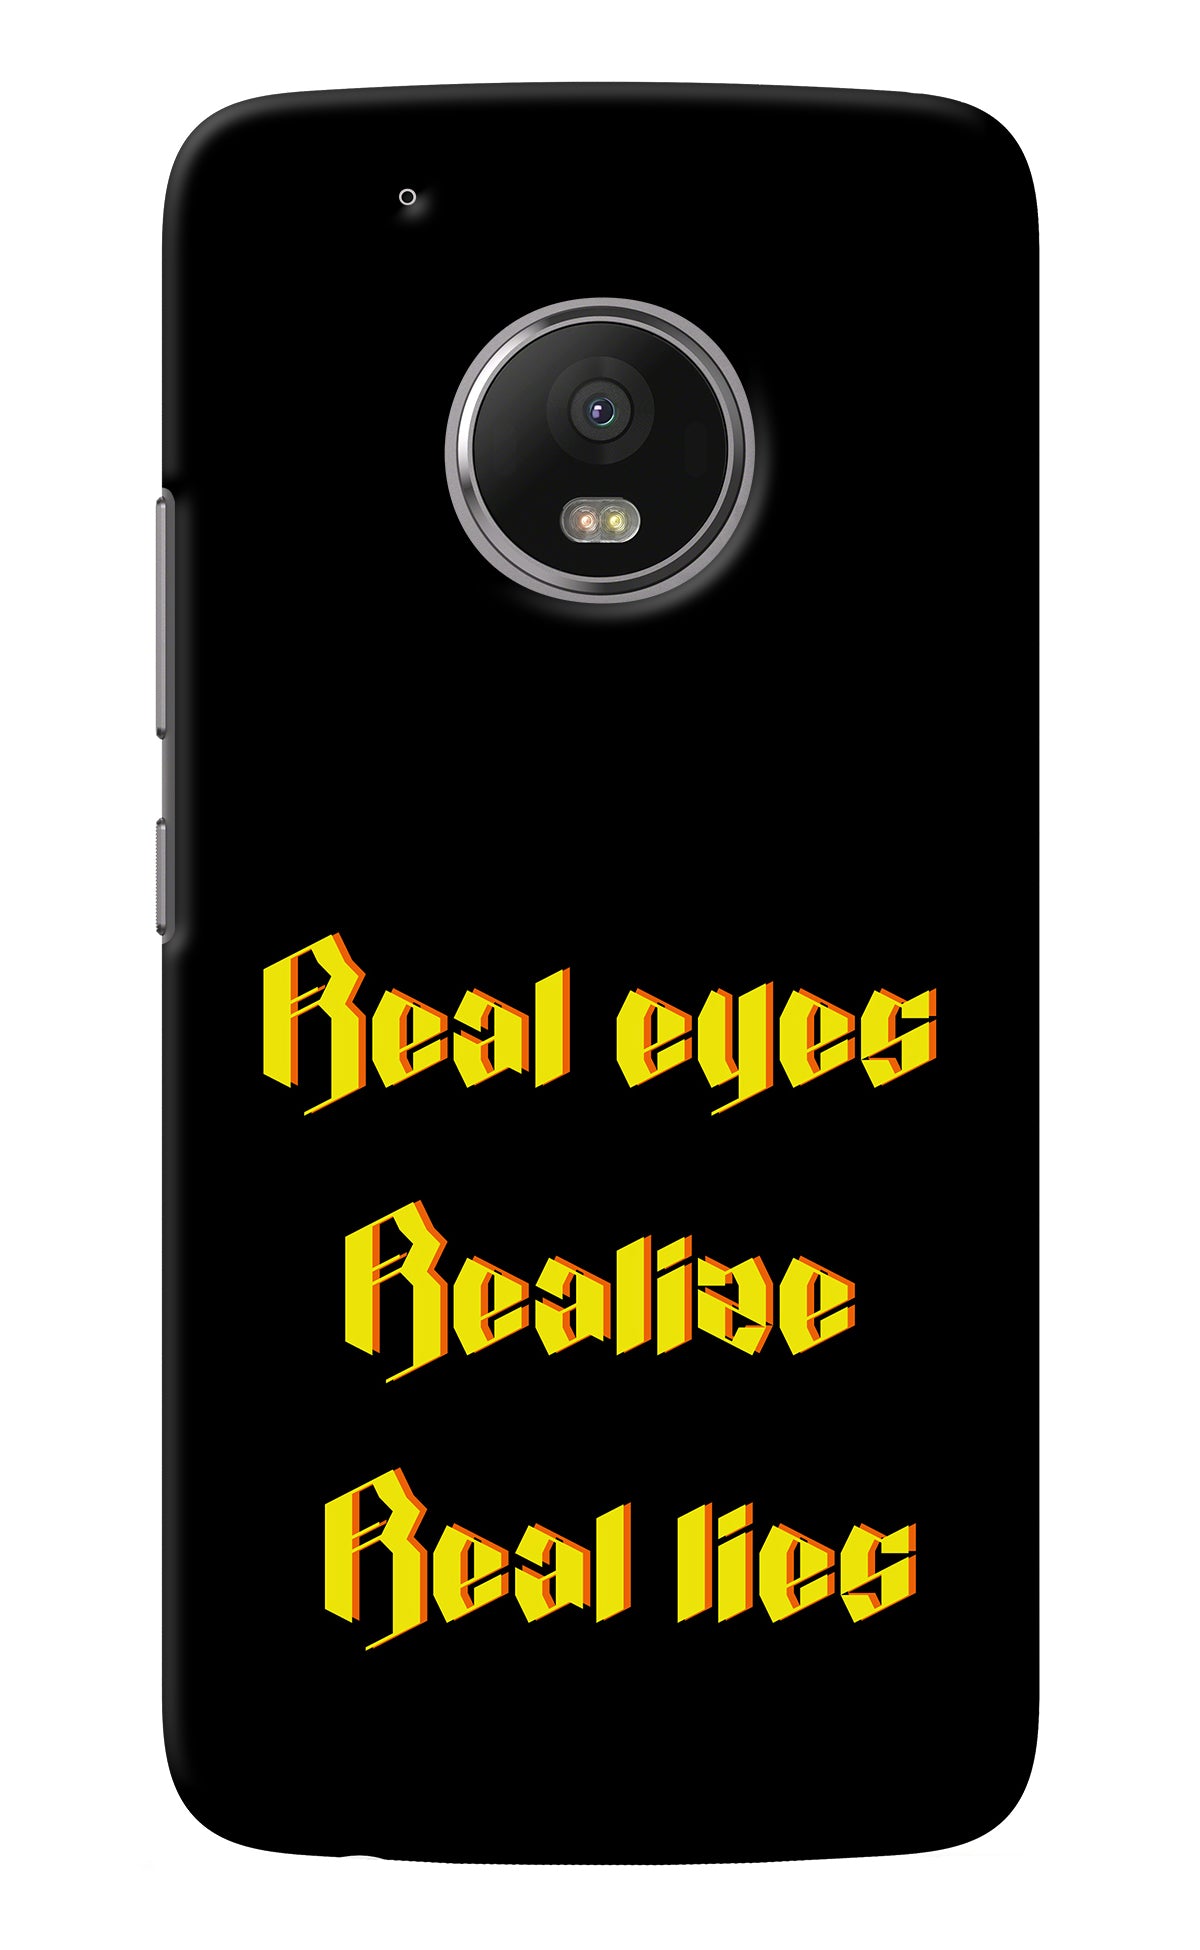 Real Eyes Realize Real Lies Moto G5 plus Back Cover